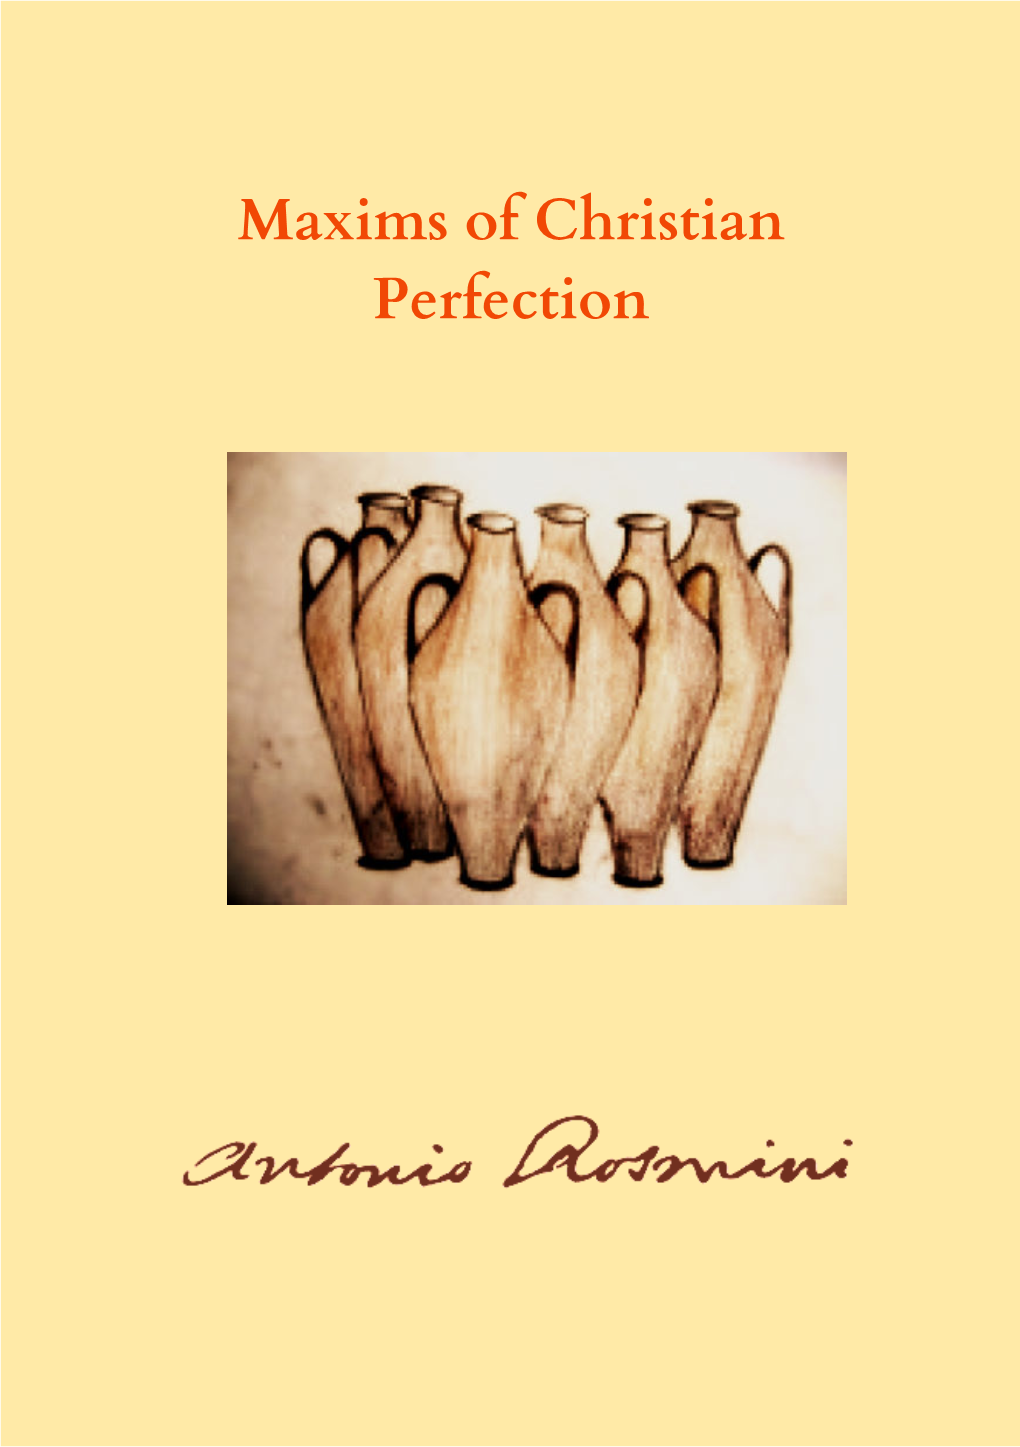 Maxims of Christian Perfection